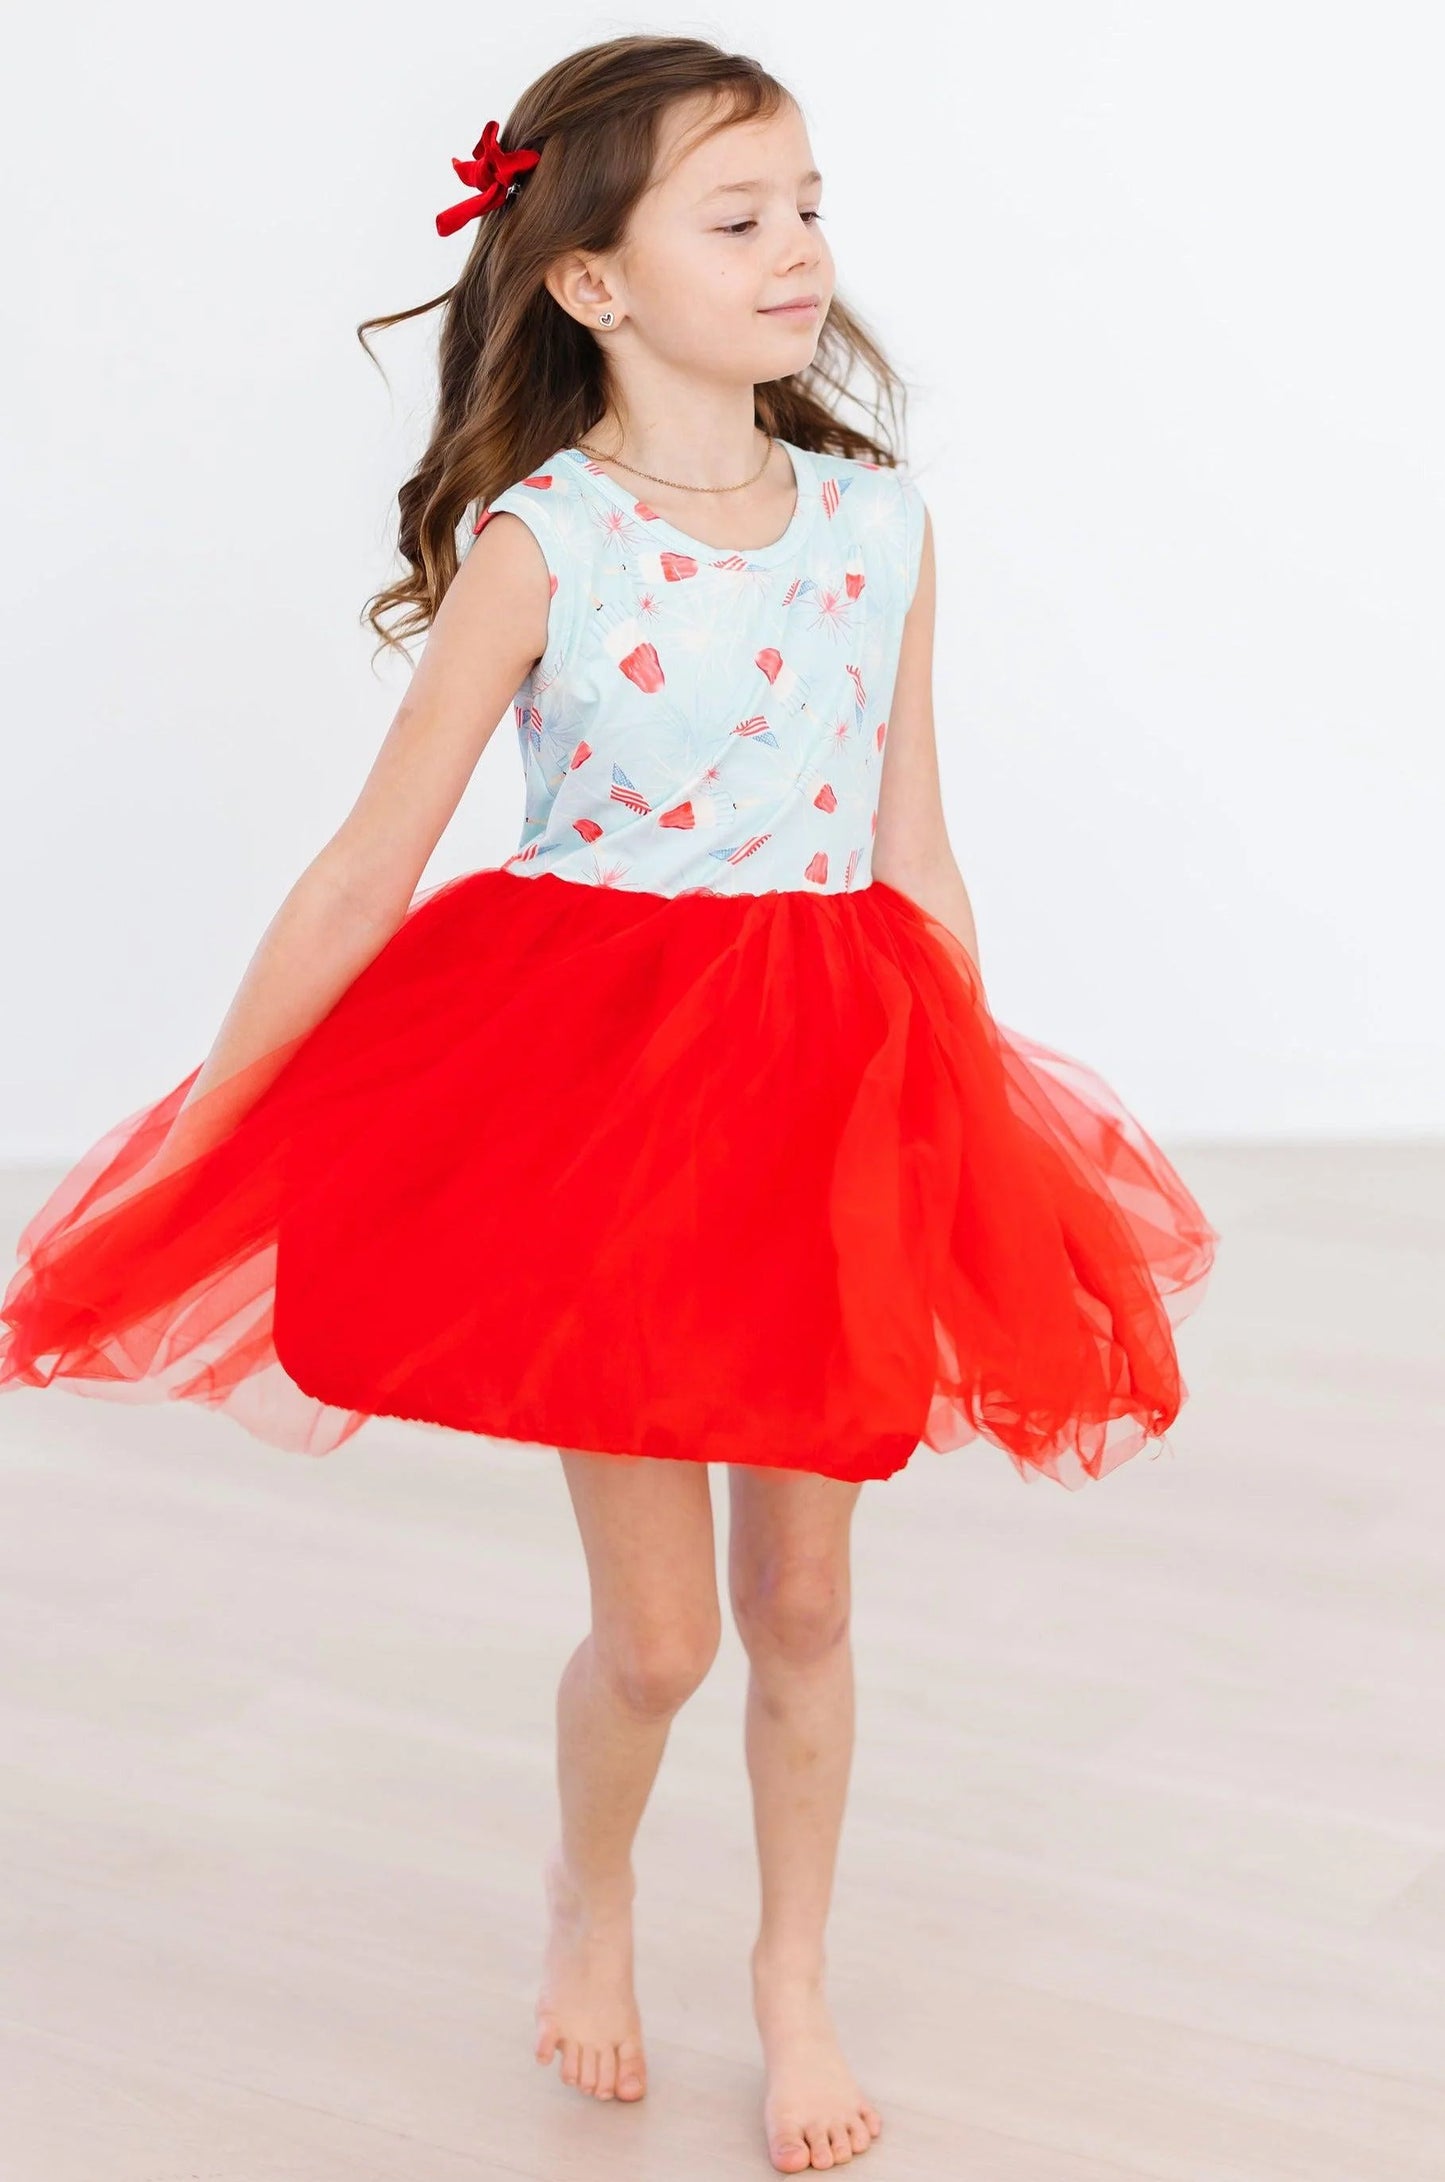 Sweet Land of Liberty Tank Tulle Dress by Mila & Rose